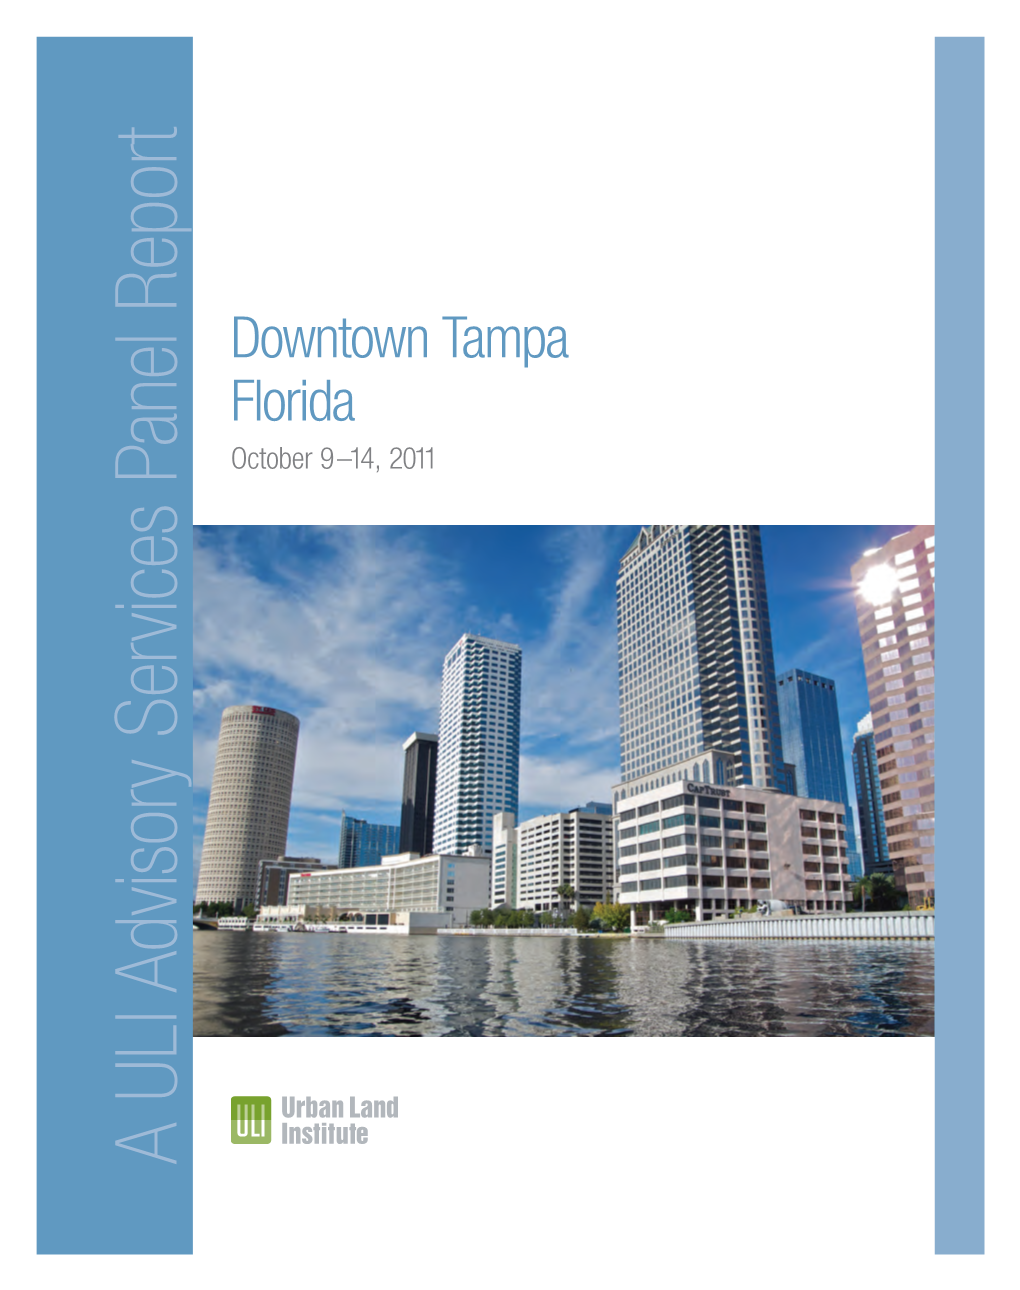 A Uli Advisory Services Panel Report 9–14,October 2011 Florida Downtown Tampa